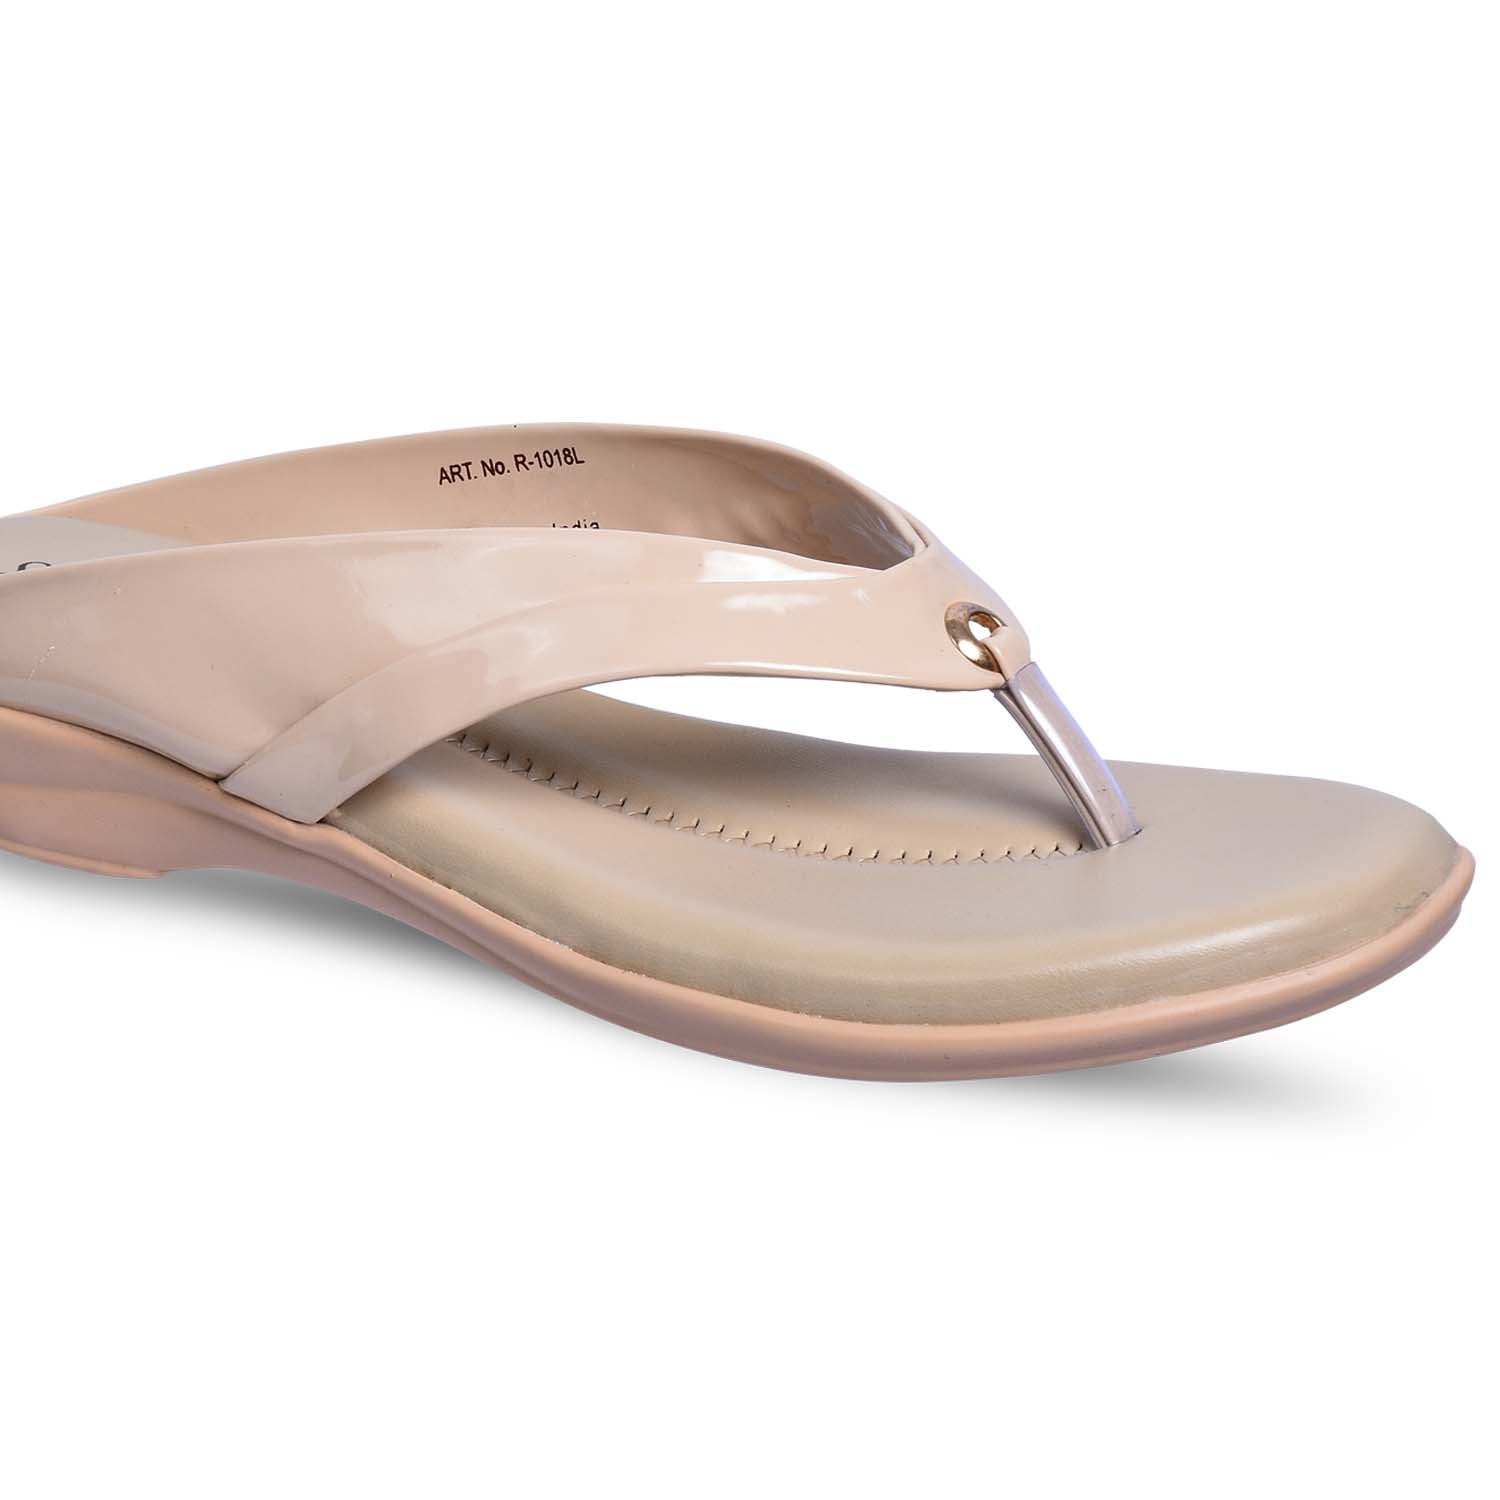 Paragon R1018L Women Sandals | Casual &amp; Formal Sandals | Stylish, Comfortable &amp; Durable | For Daily &amp; Occasion Wear